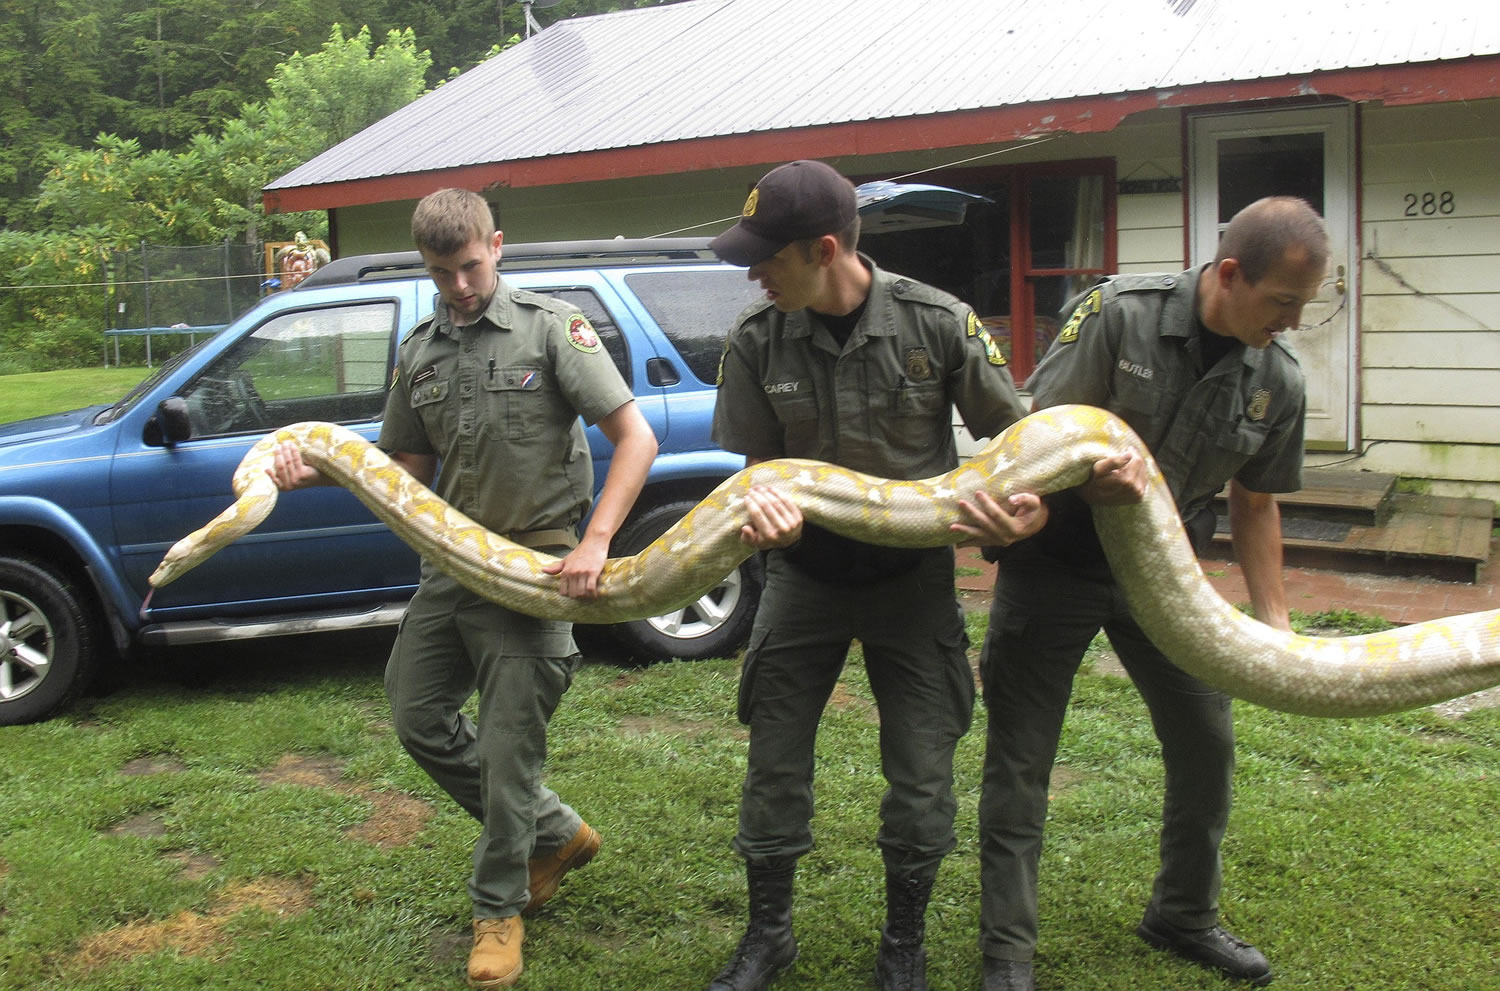 Mack Ralbovsky, from left, of Rainforest Reptile Shows, gets assistance from Vermont game wardens Tim Carey and Wes Butler as they remove a reticulated python, between 17 and 18 feet long, from a home Tuesday.